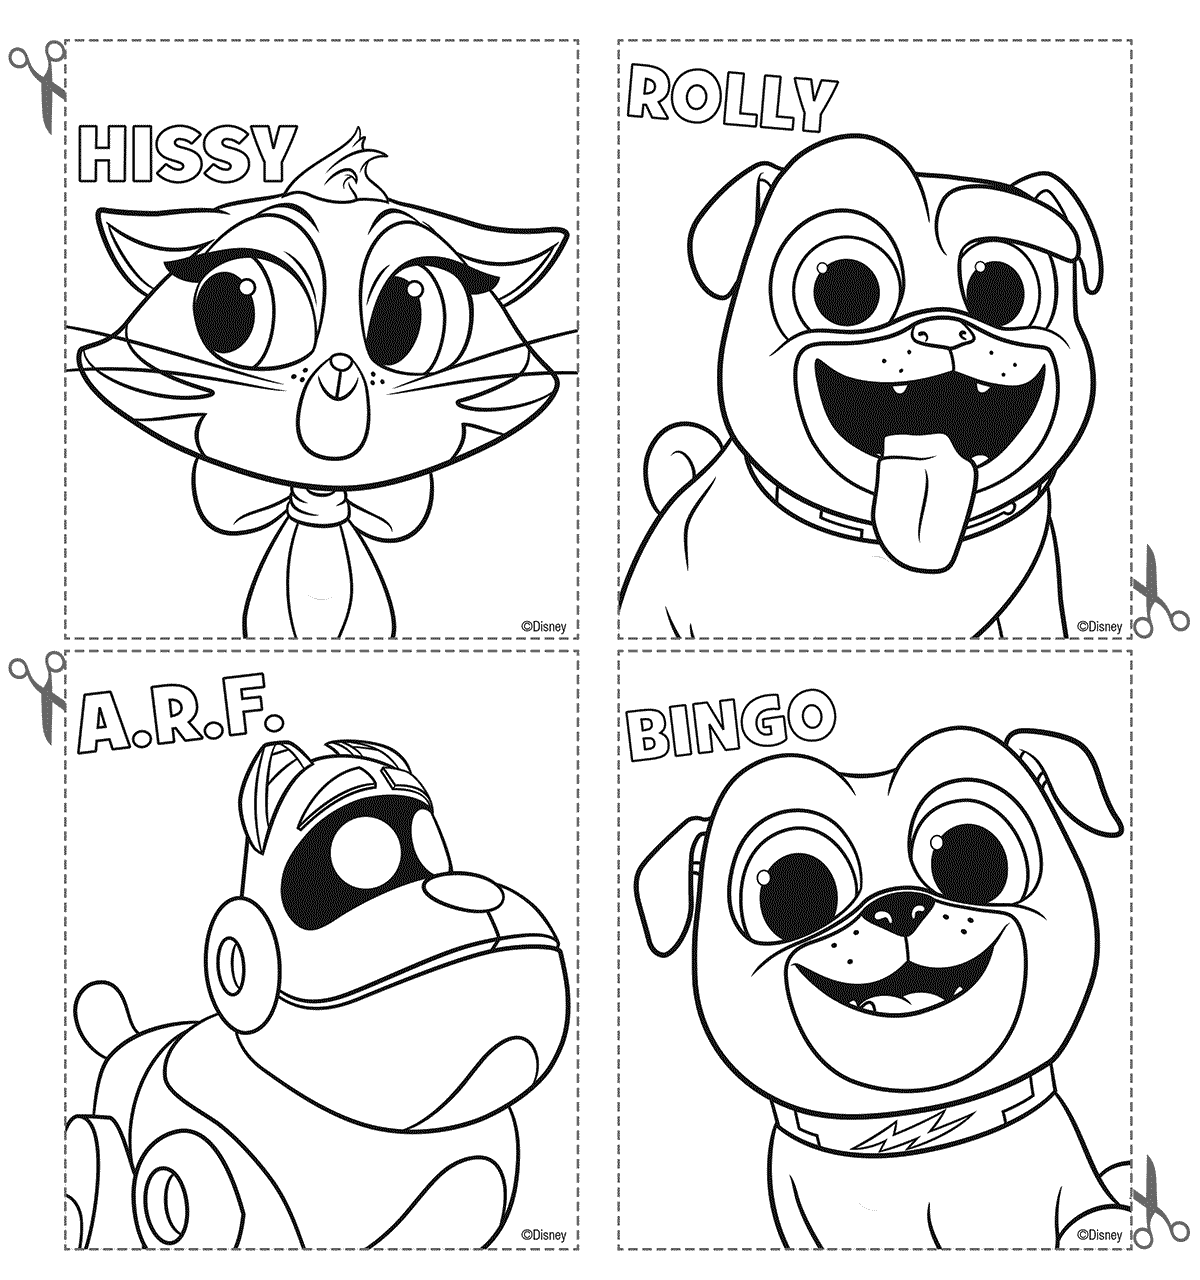 Disney Puppy Dog Pals Coloring Pages Cards